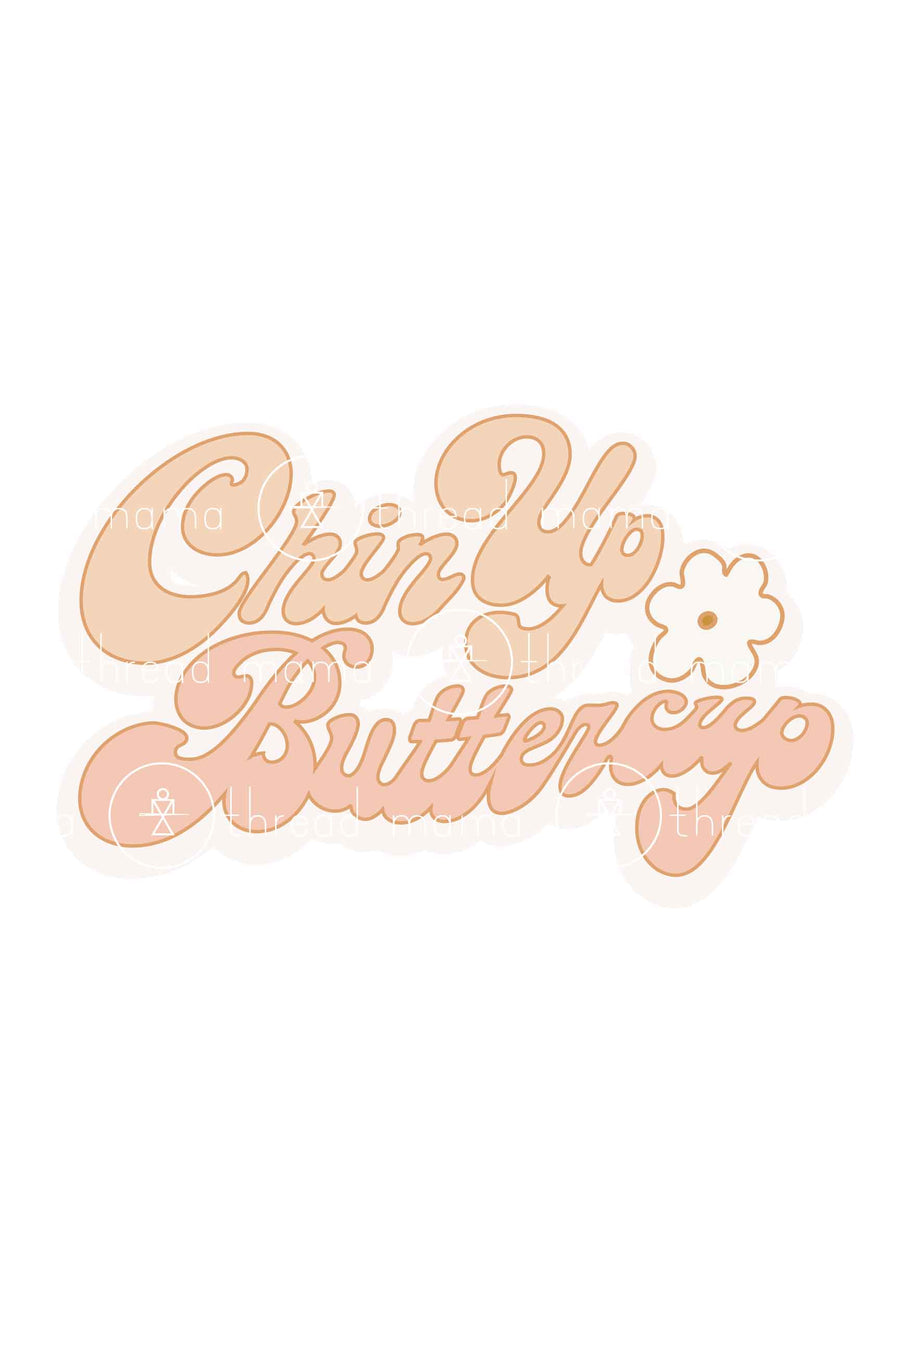 Chin Up Buttercup - 3 colors (Printable Poster)